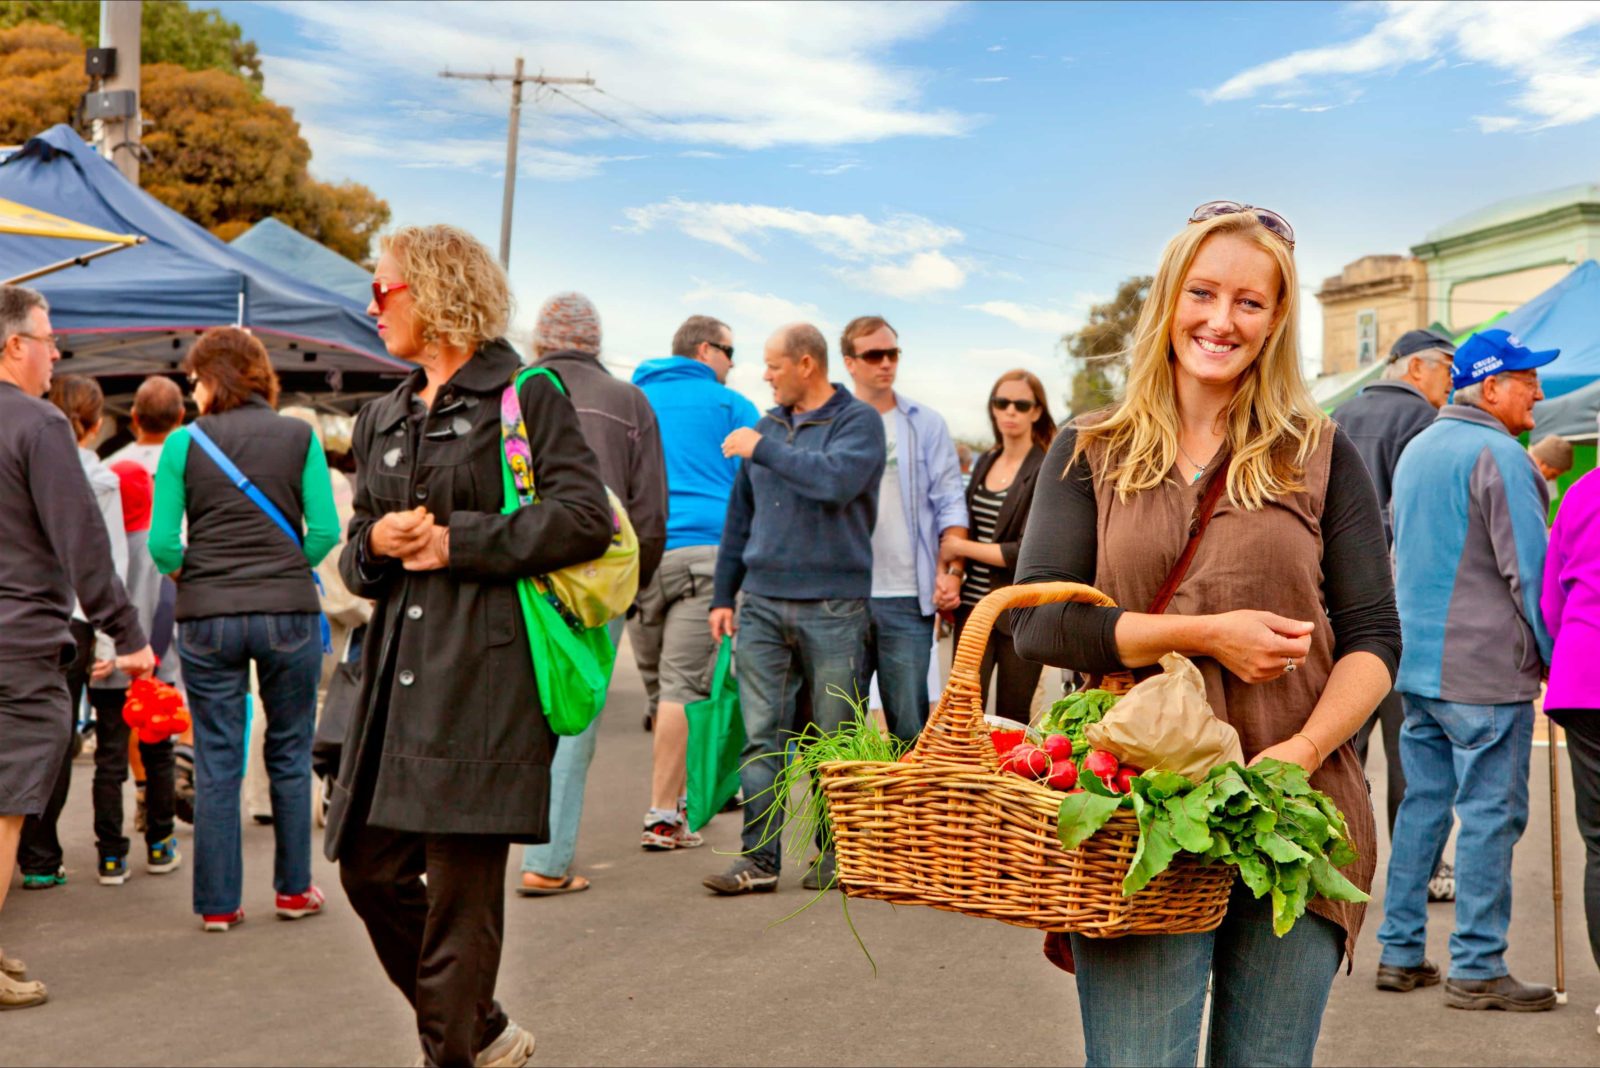 Over 80 stalls line the beautiful heritage streetscape in Talbot every month.